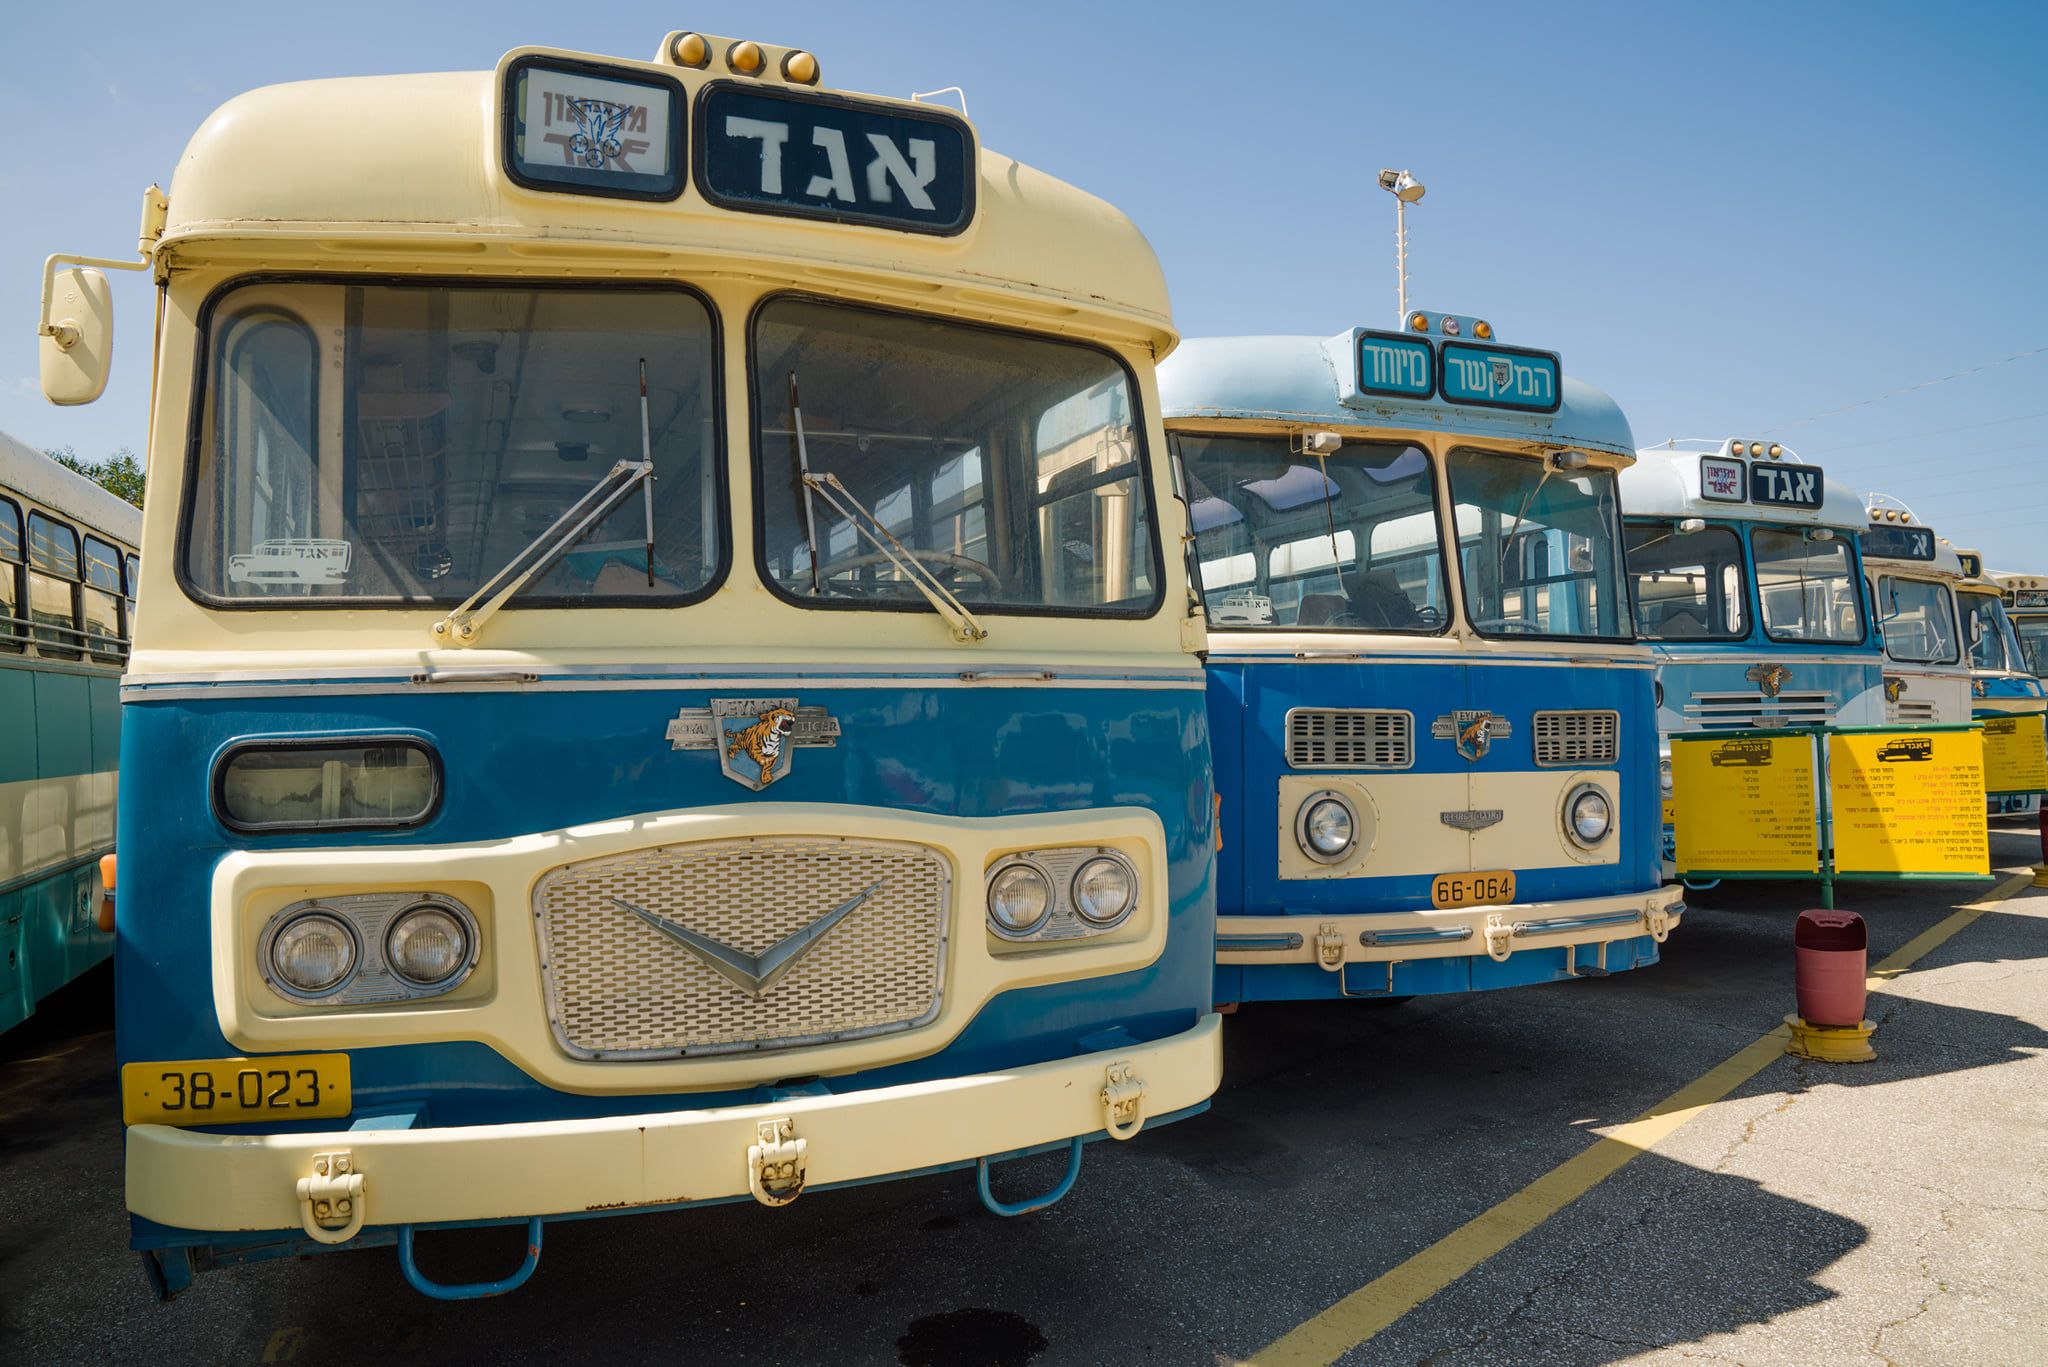   Antique Egged buses from the Egged Bus Museum in Holon